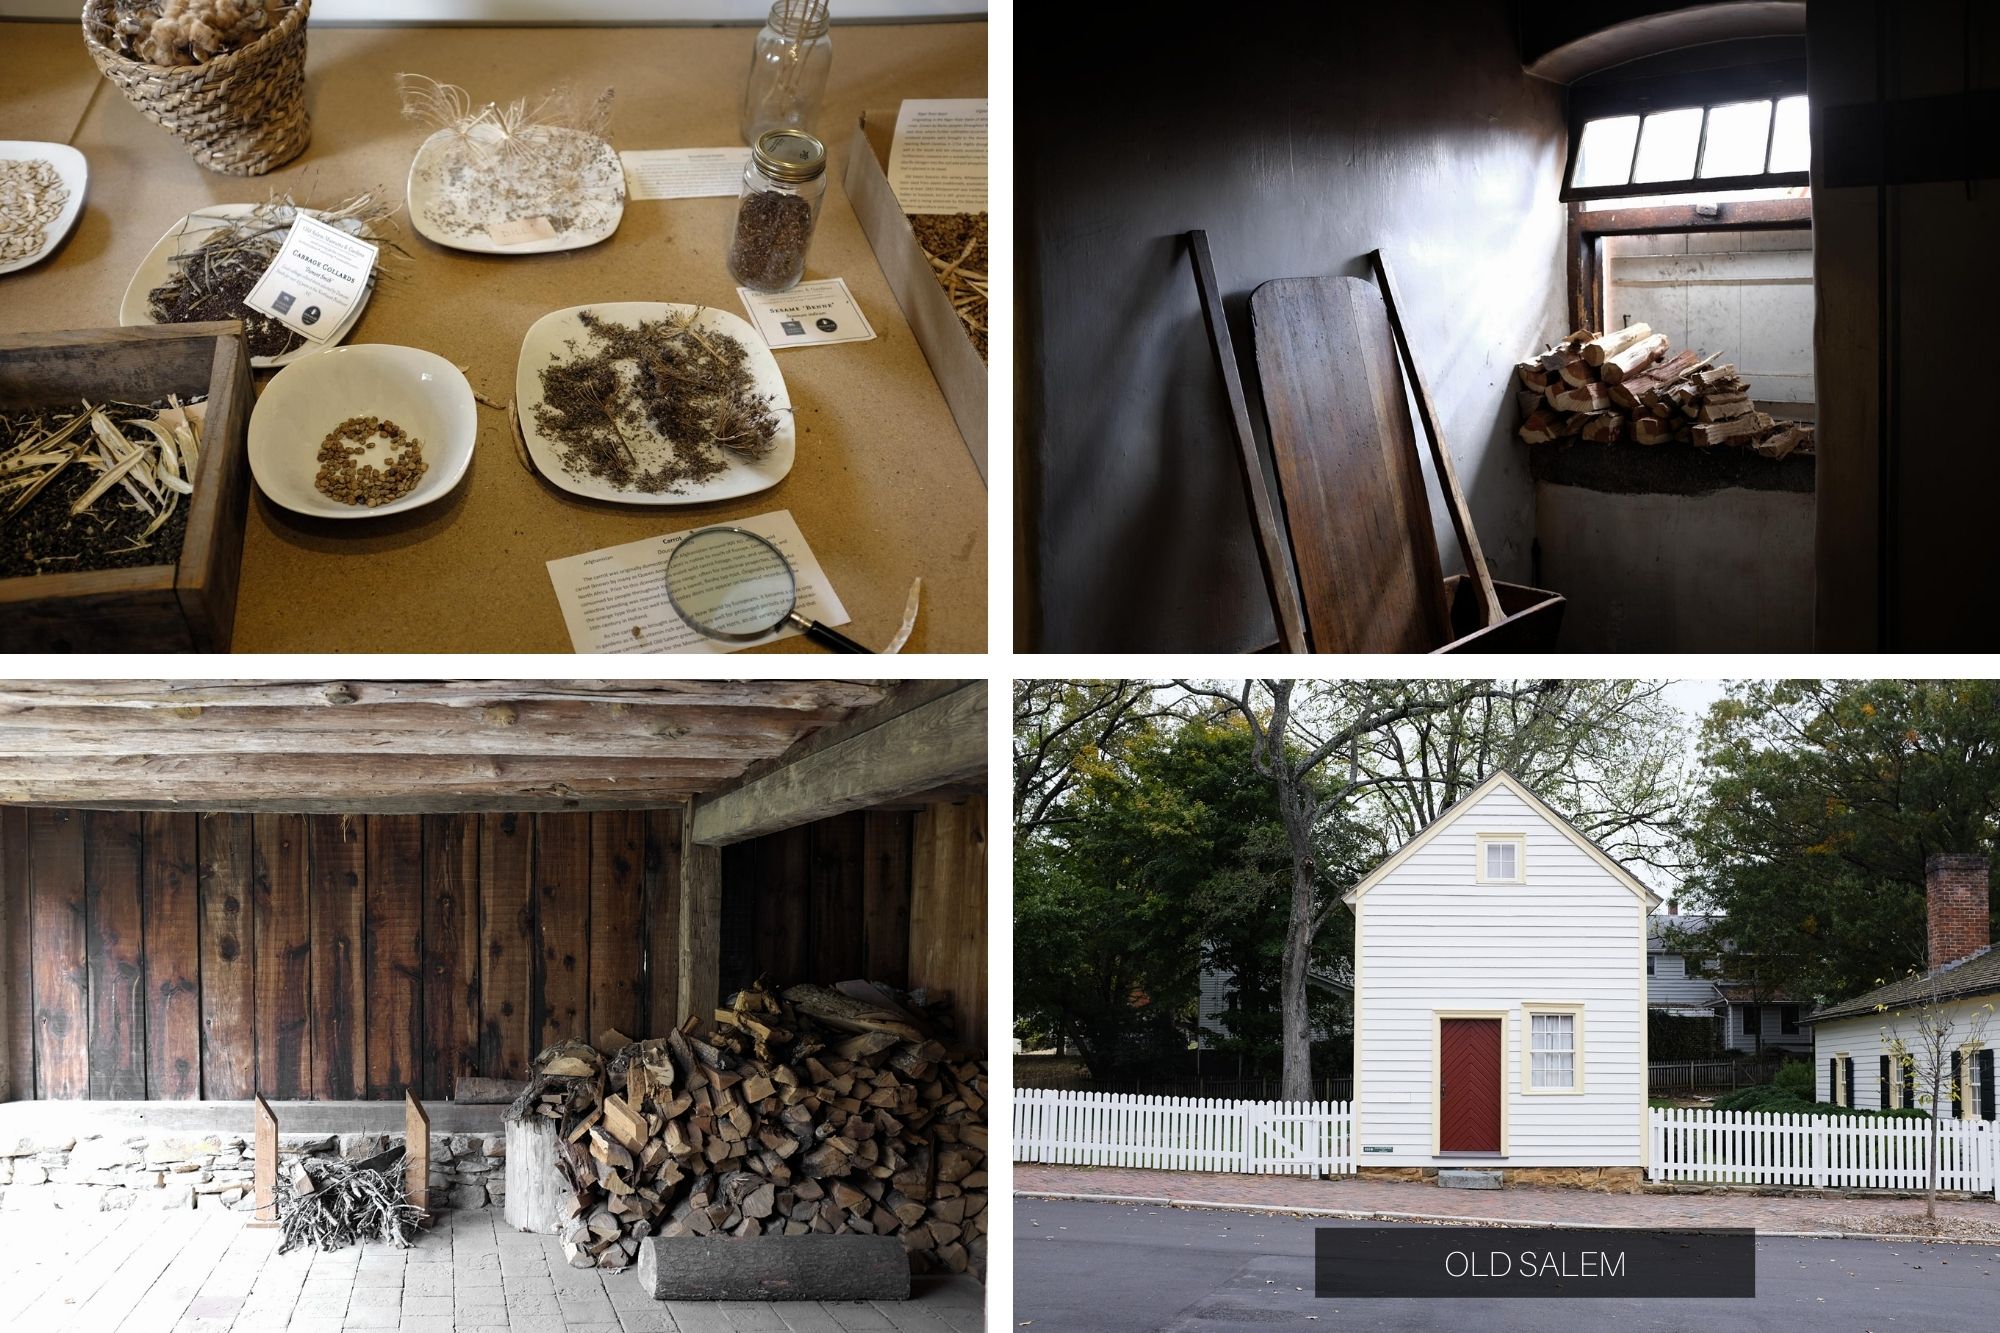 Images from Old Salem: Seed storage, bread baking hearth, firewood, an old white house